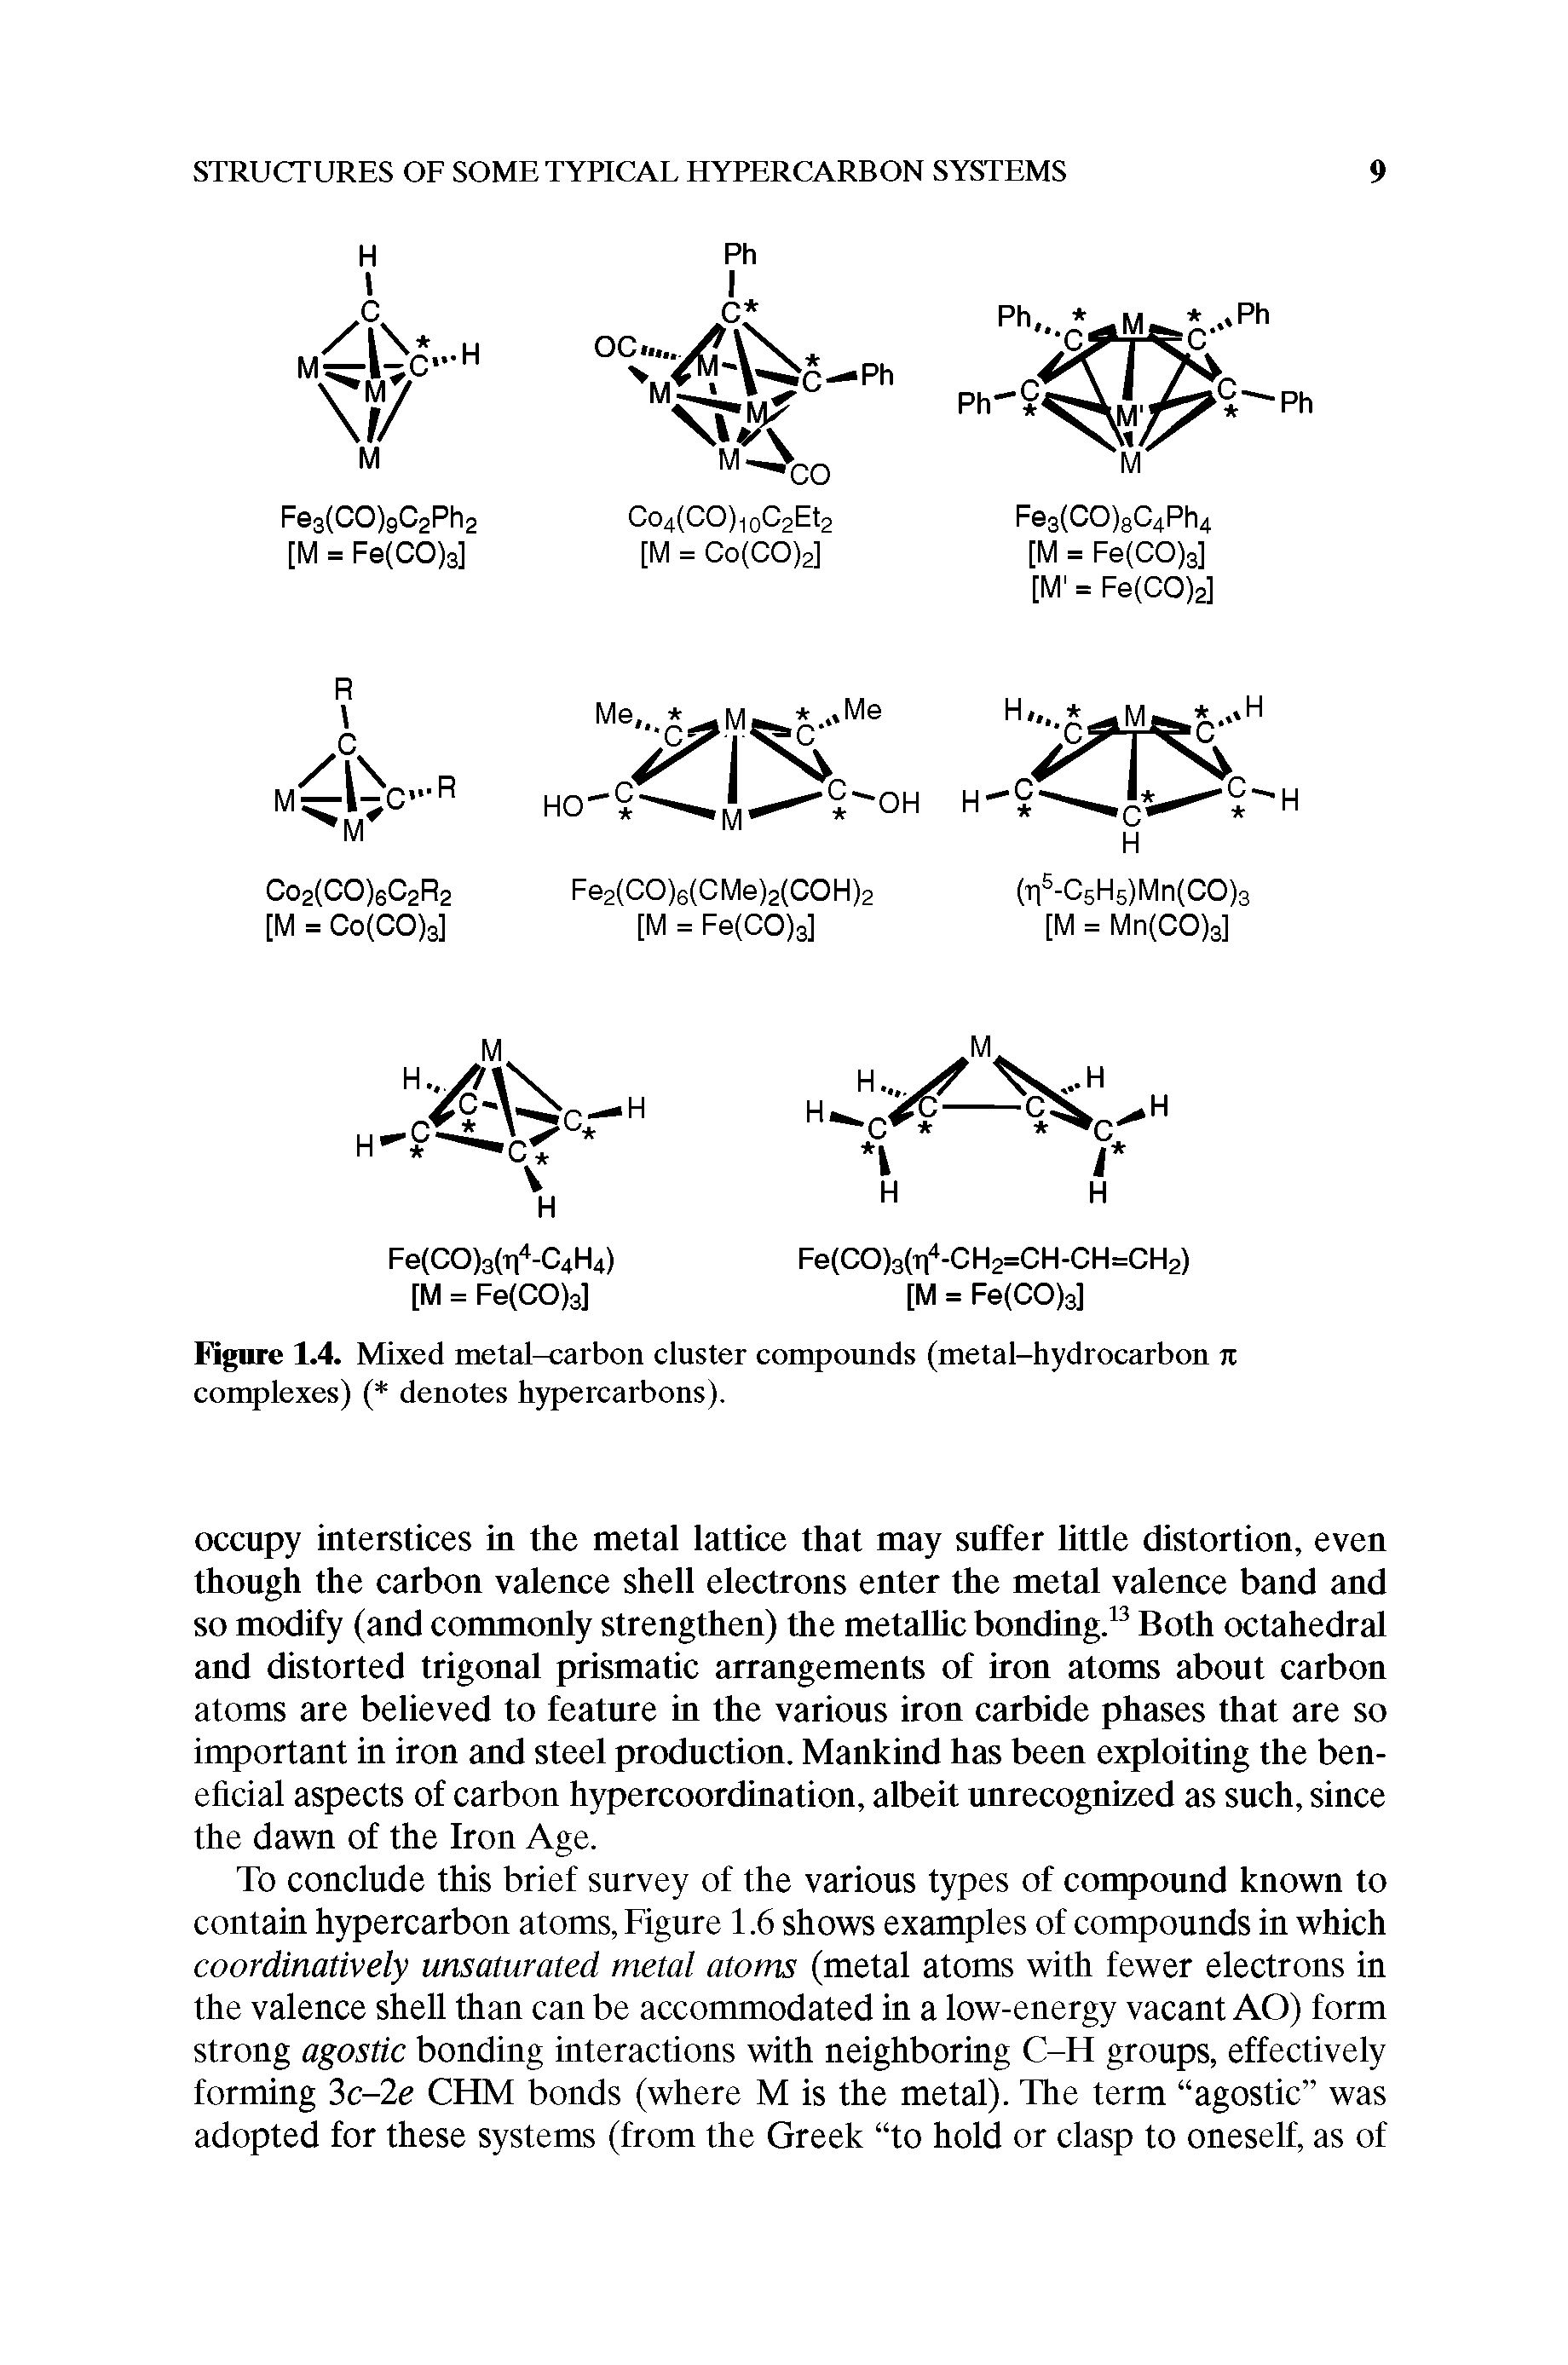 Figure 1.4. Mixed metal-carbon cluster compounds (metal-hydrocarbon n complexes) ( denotes hypercarbons).